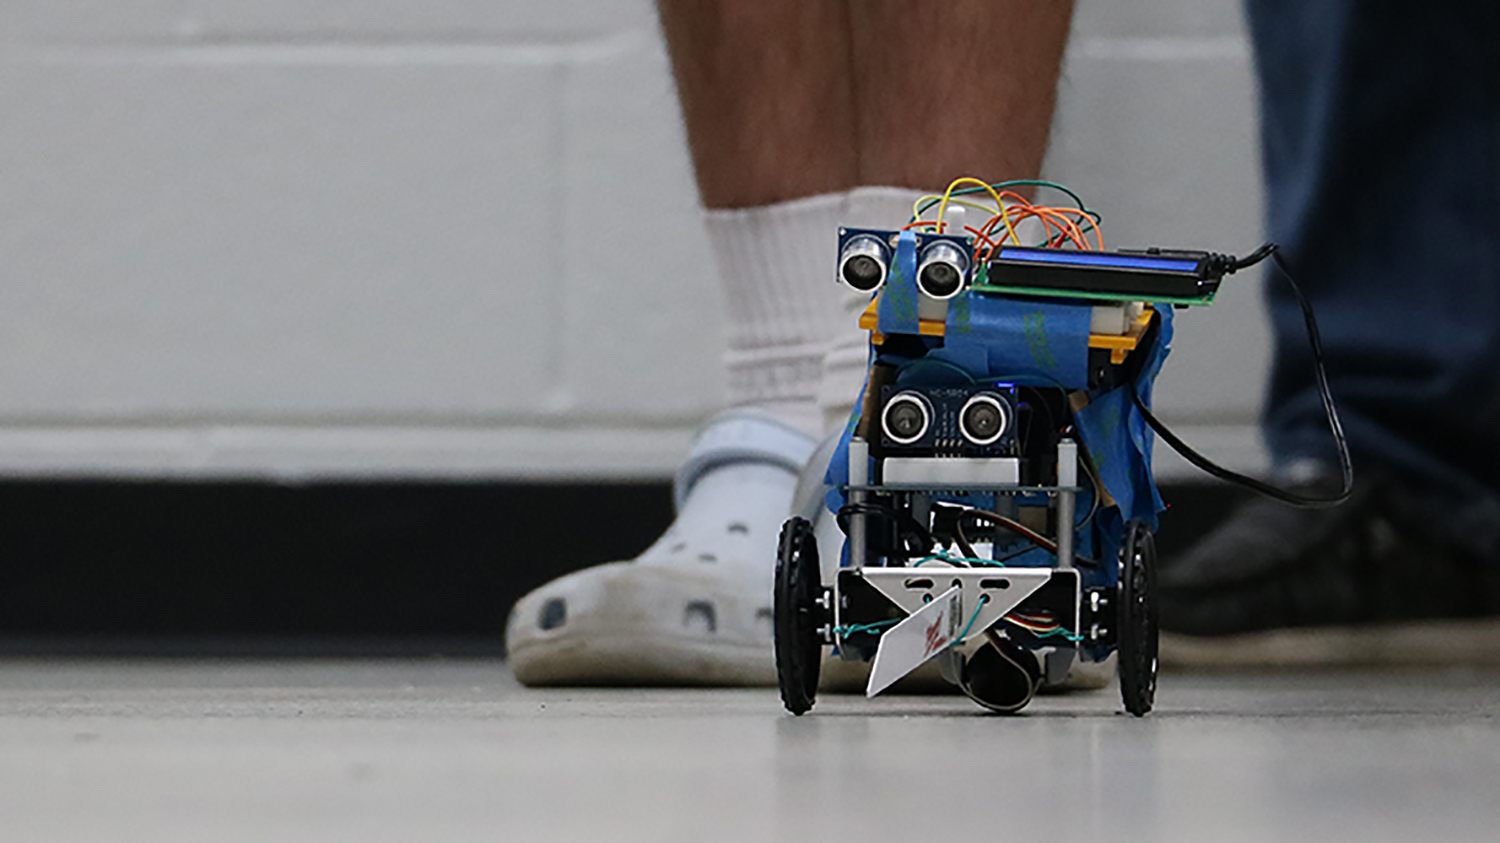 A floor level photo of a small blue-colored , black-wheeled agricultural robot in use at a summer camp. The floor is white and there are two sets of shoes in the background behind the robot.